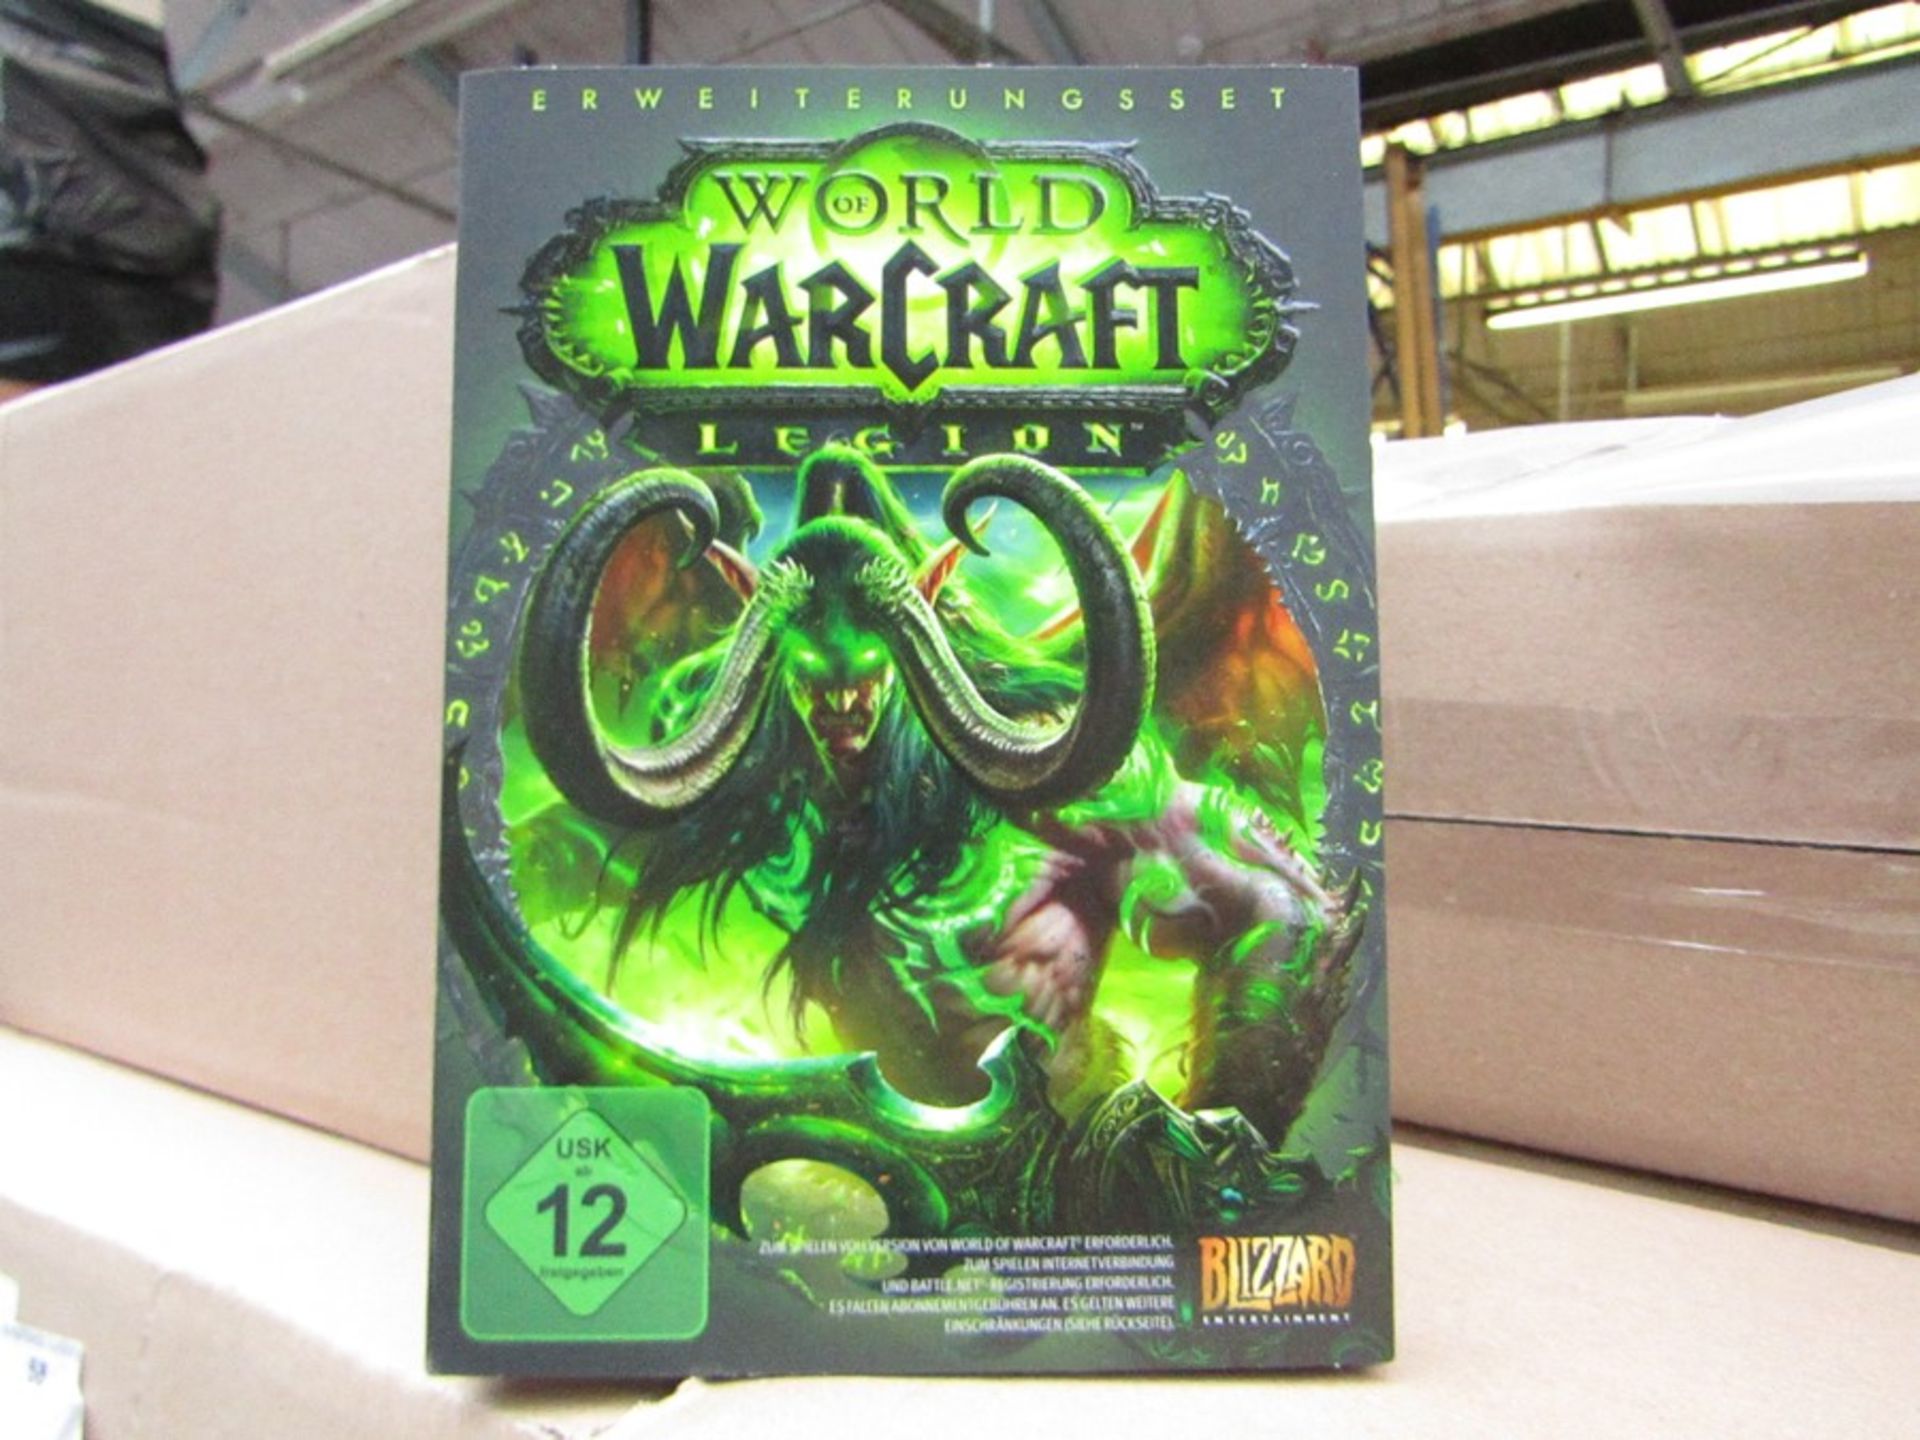 100x World of Warcraft Legion games, new and still sealed, these games and the packaging are in what